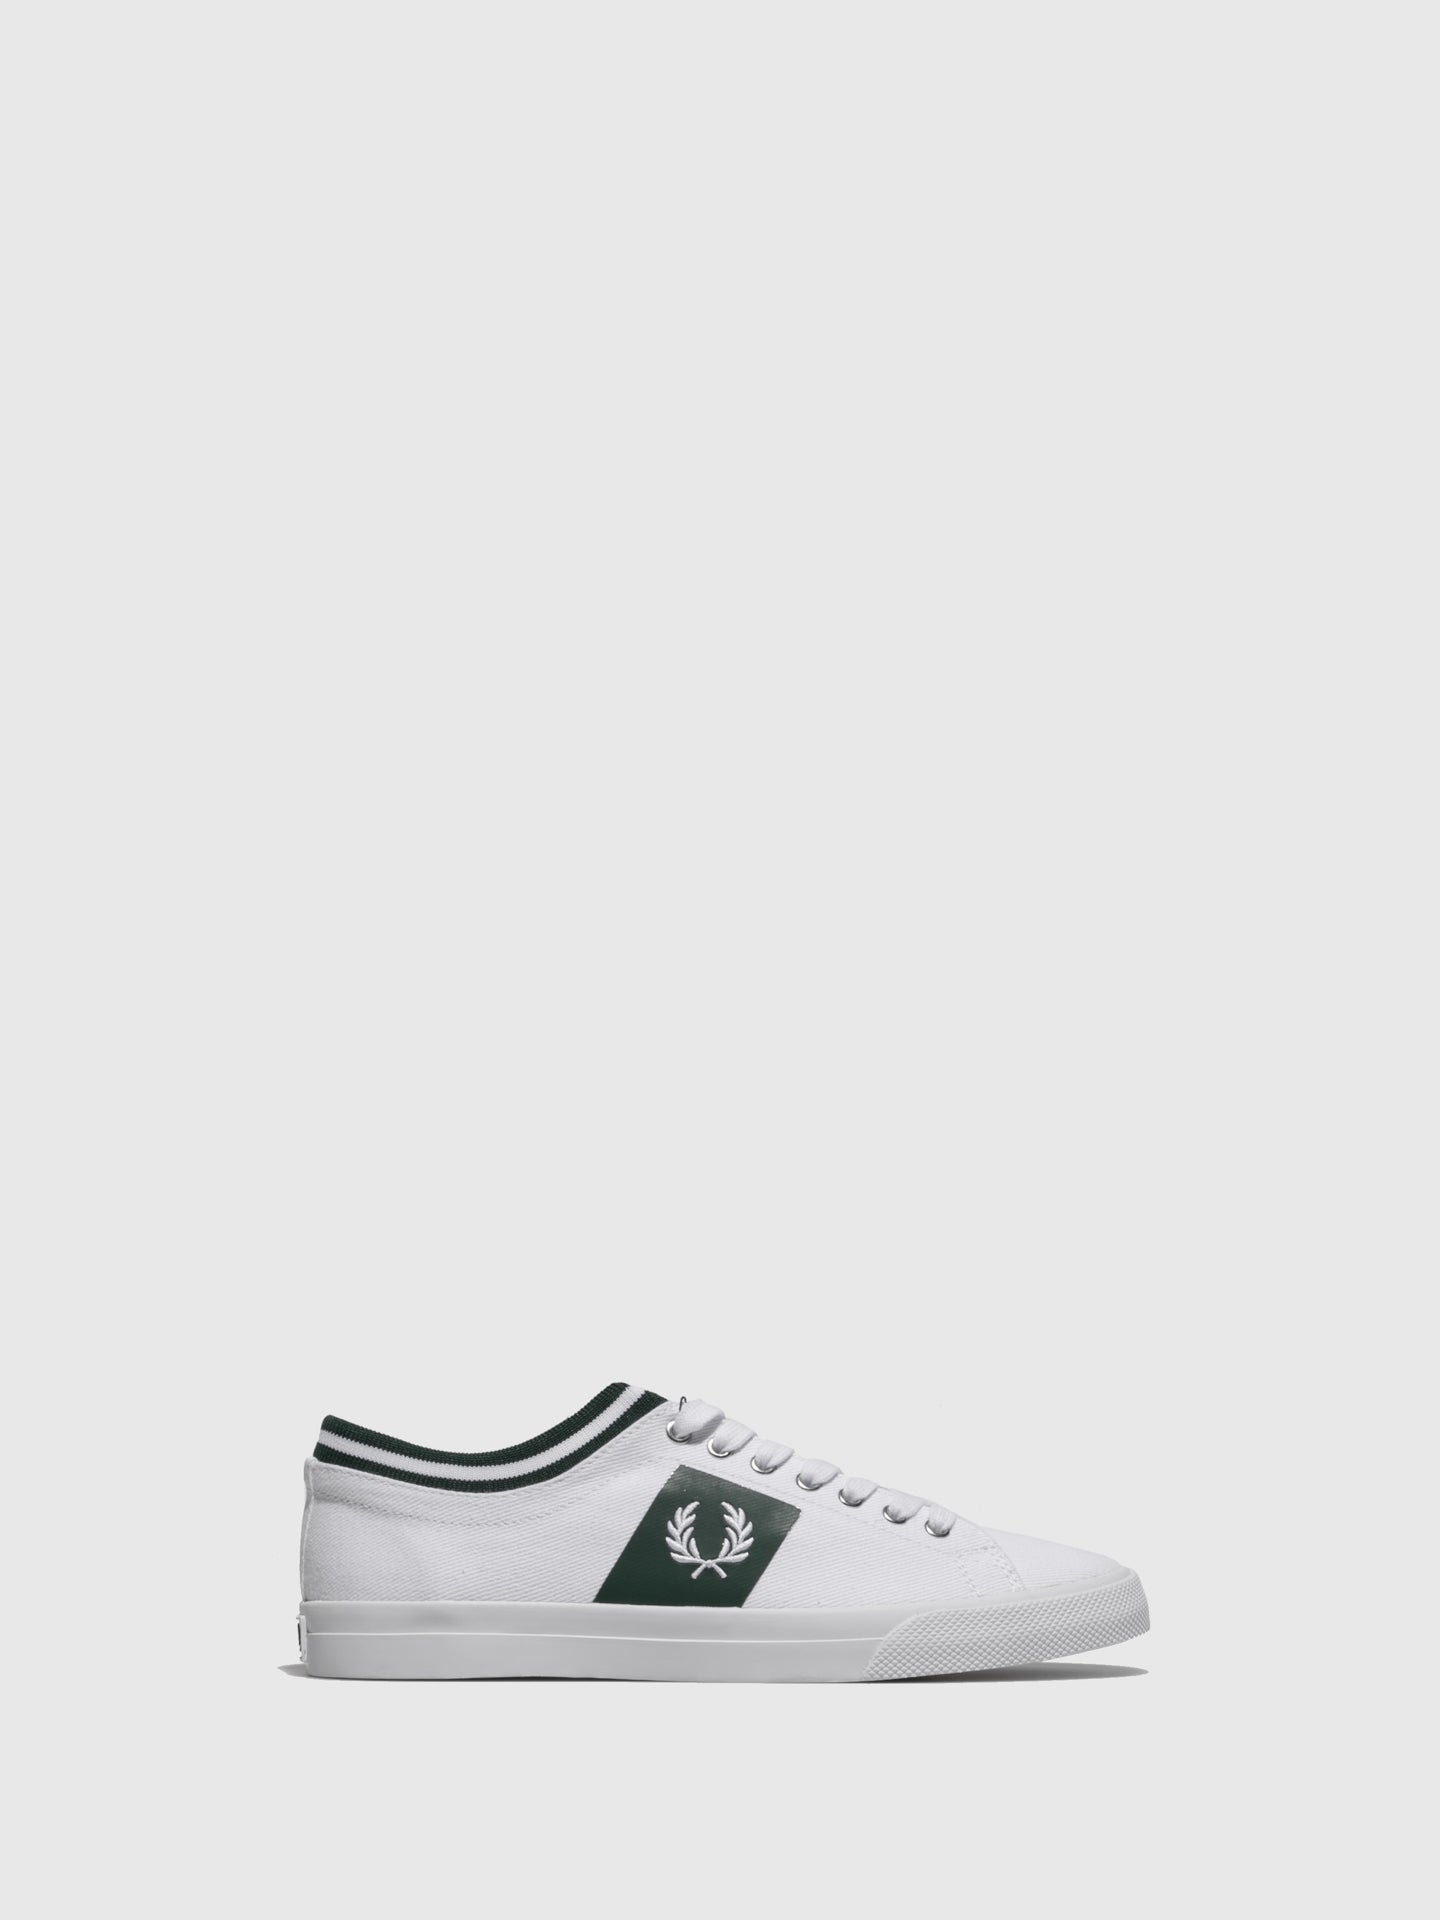 fred perry shoes green